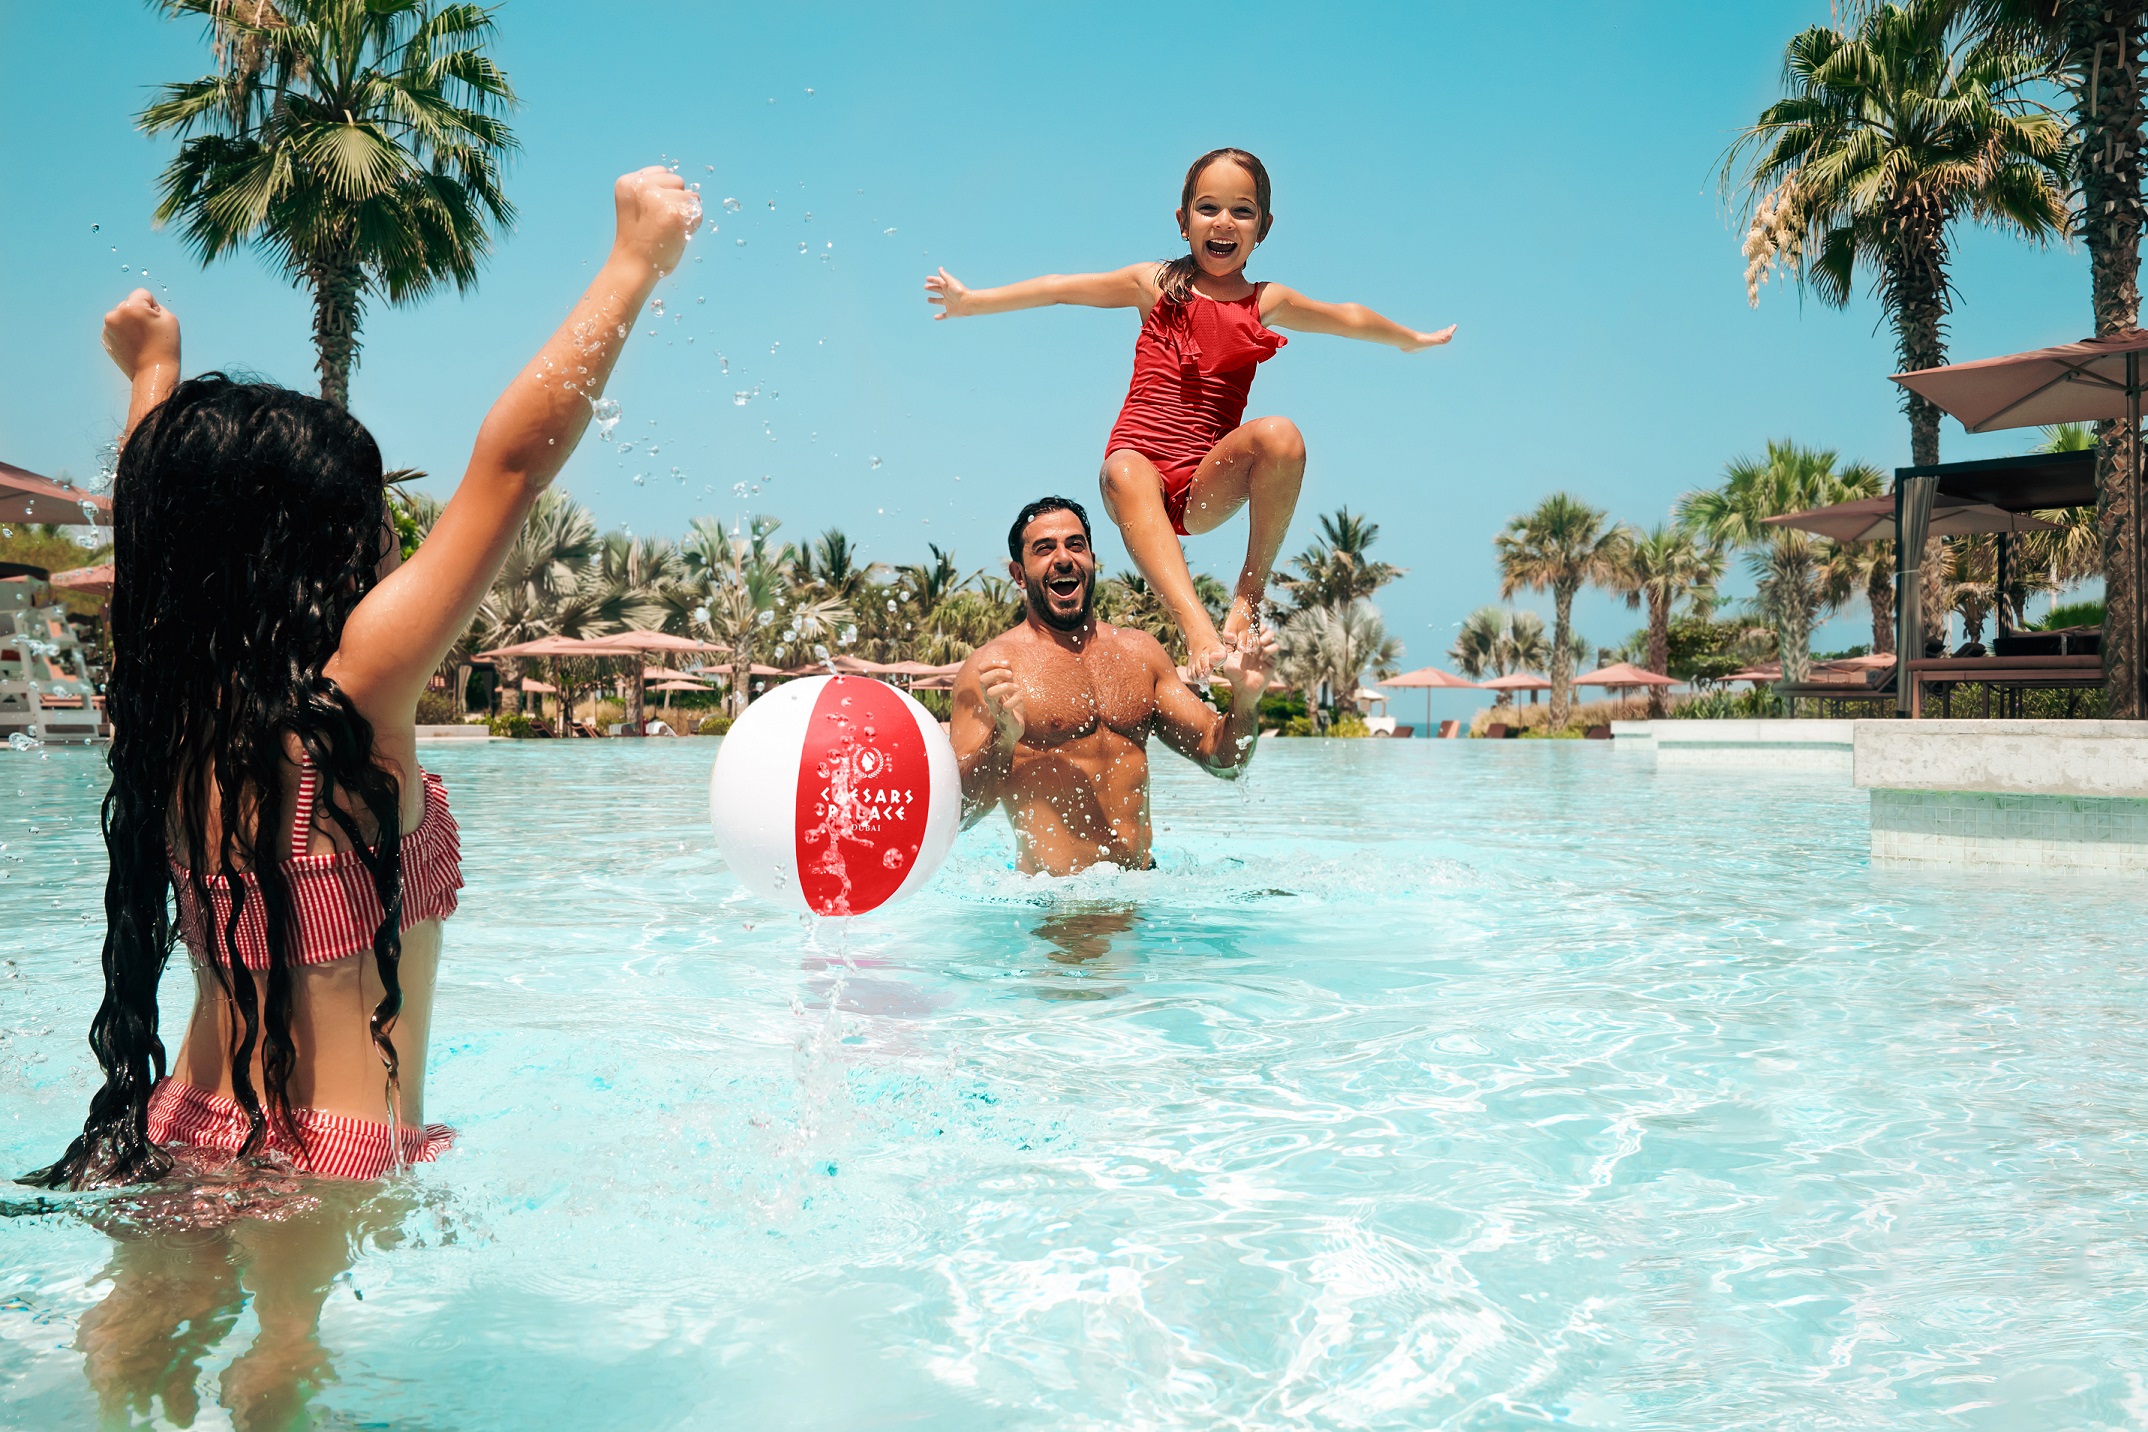 Free upgrade to half board dine-around for a family of 3 at the Caesars Palace in Dubai this August!